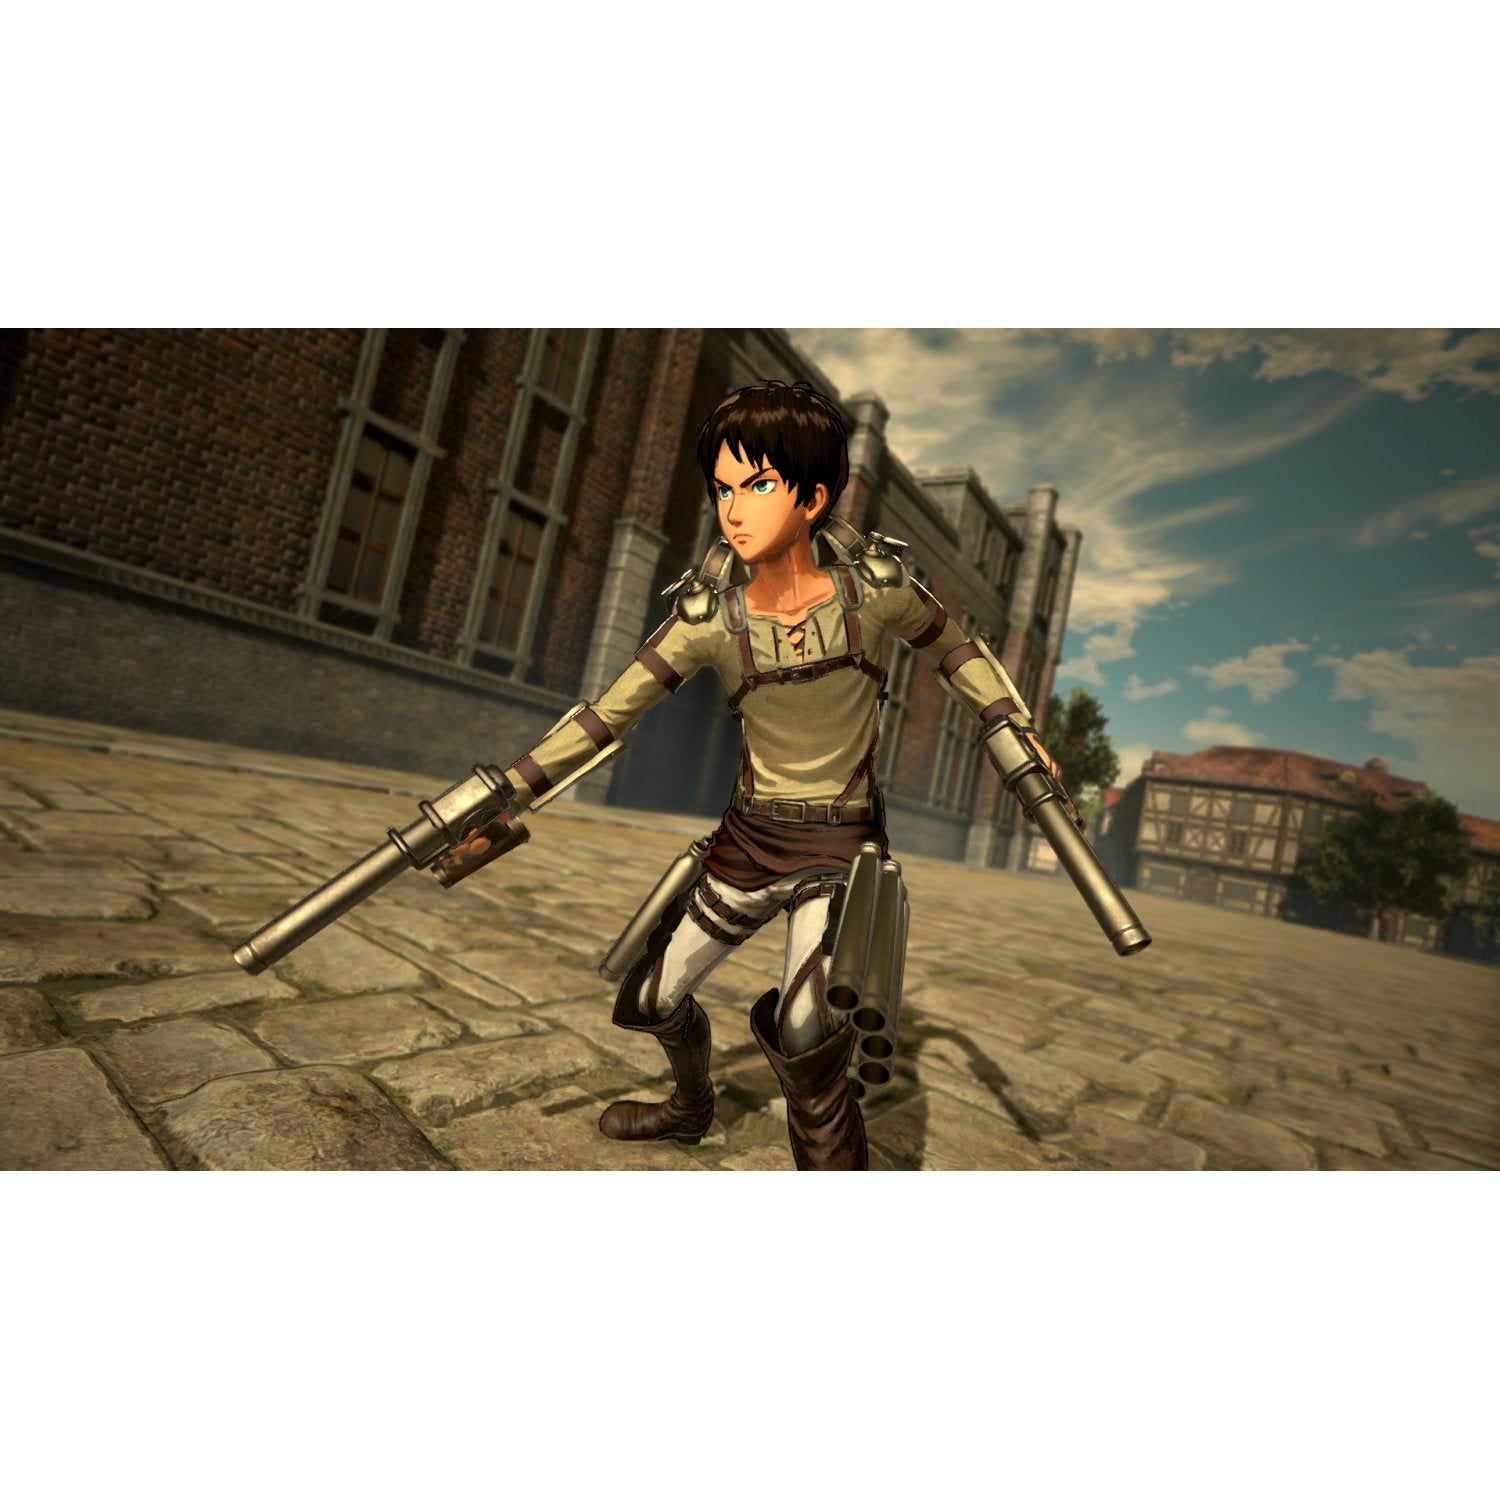 PS4 Attack on Titan 2: Final Battle